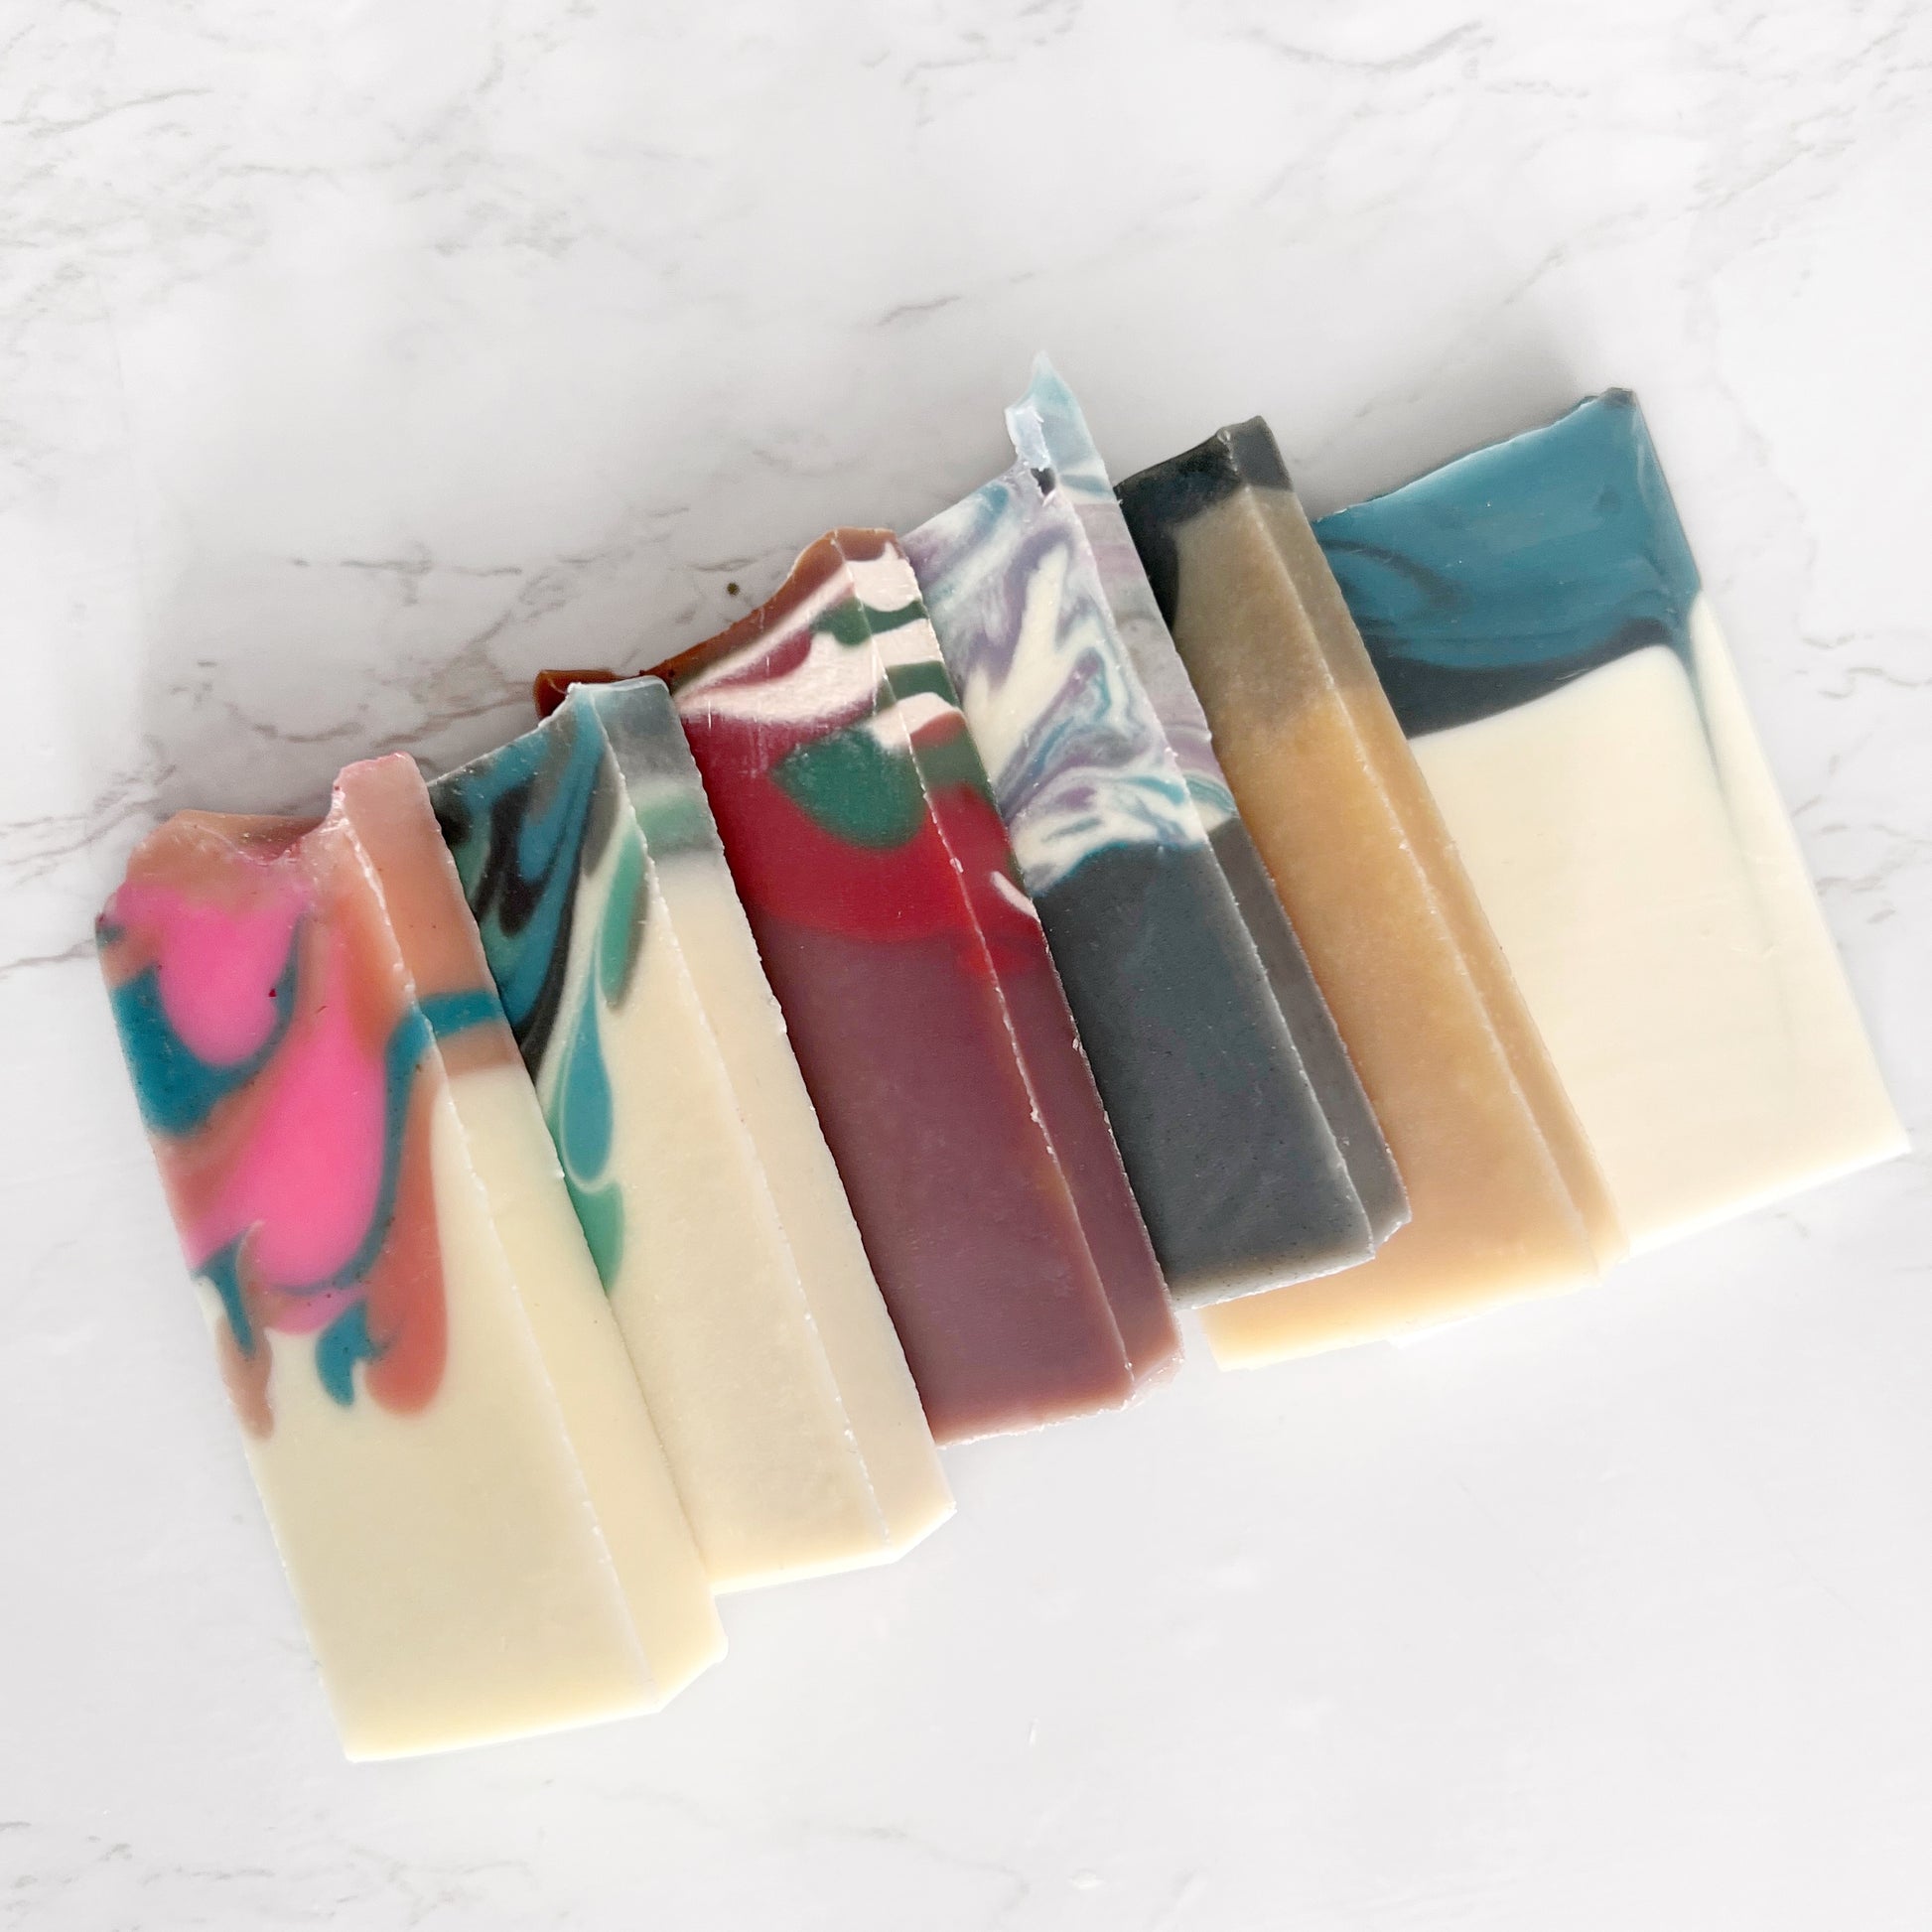 Handmade soap samples from Lather and Soul